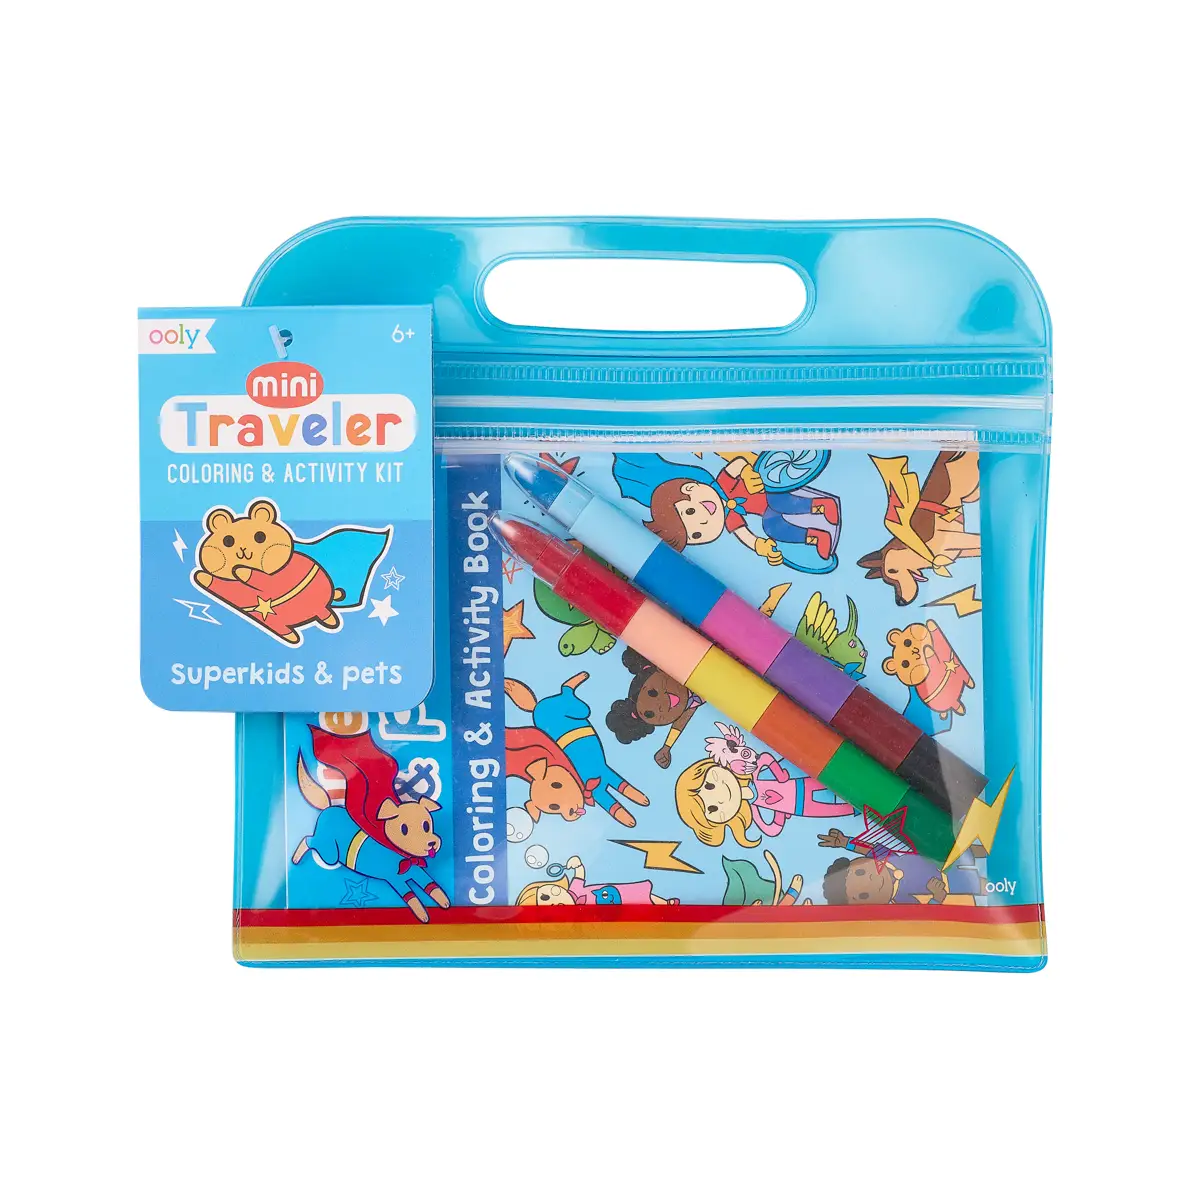 ooly Ooly Mini Traveler Coloring + Activity Kit - Superkids & Pets